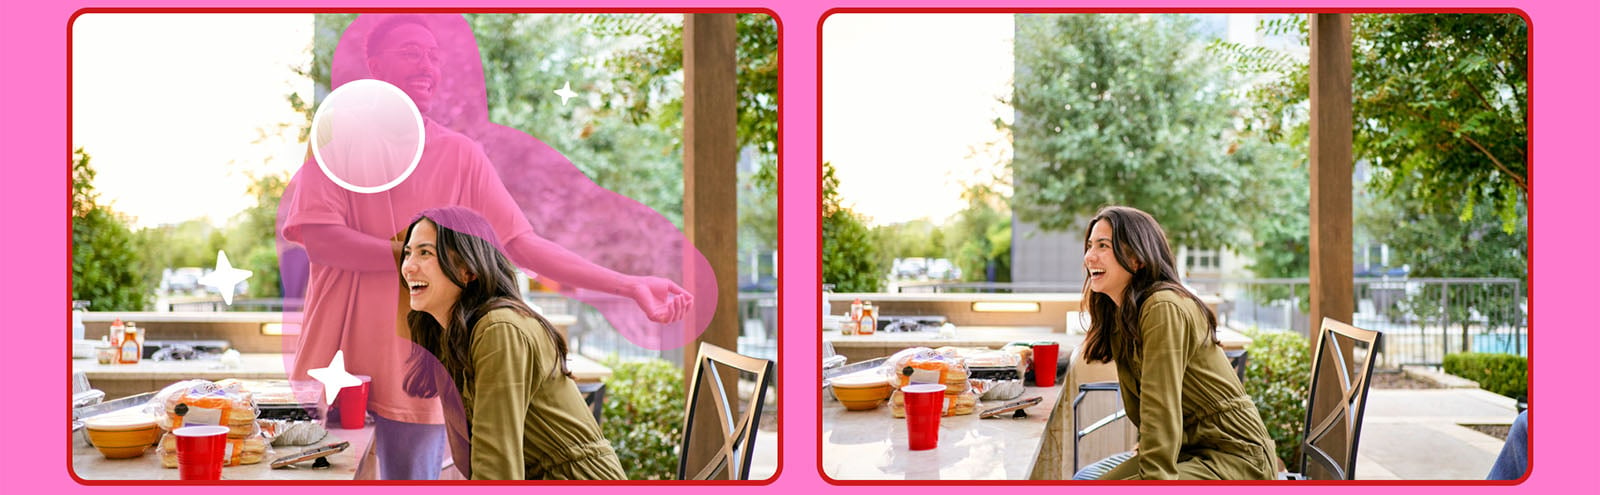  Two-panel image demonstrating the removal of a photobomb. left: a woman at a picnic table with a transparent pink figure overlapping her. right: same woman laughing, pink figure removed for clarity.